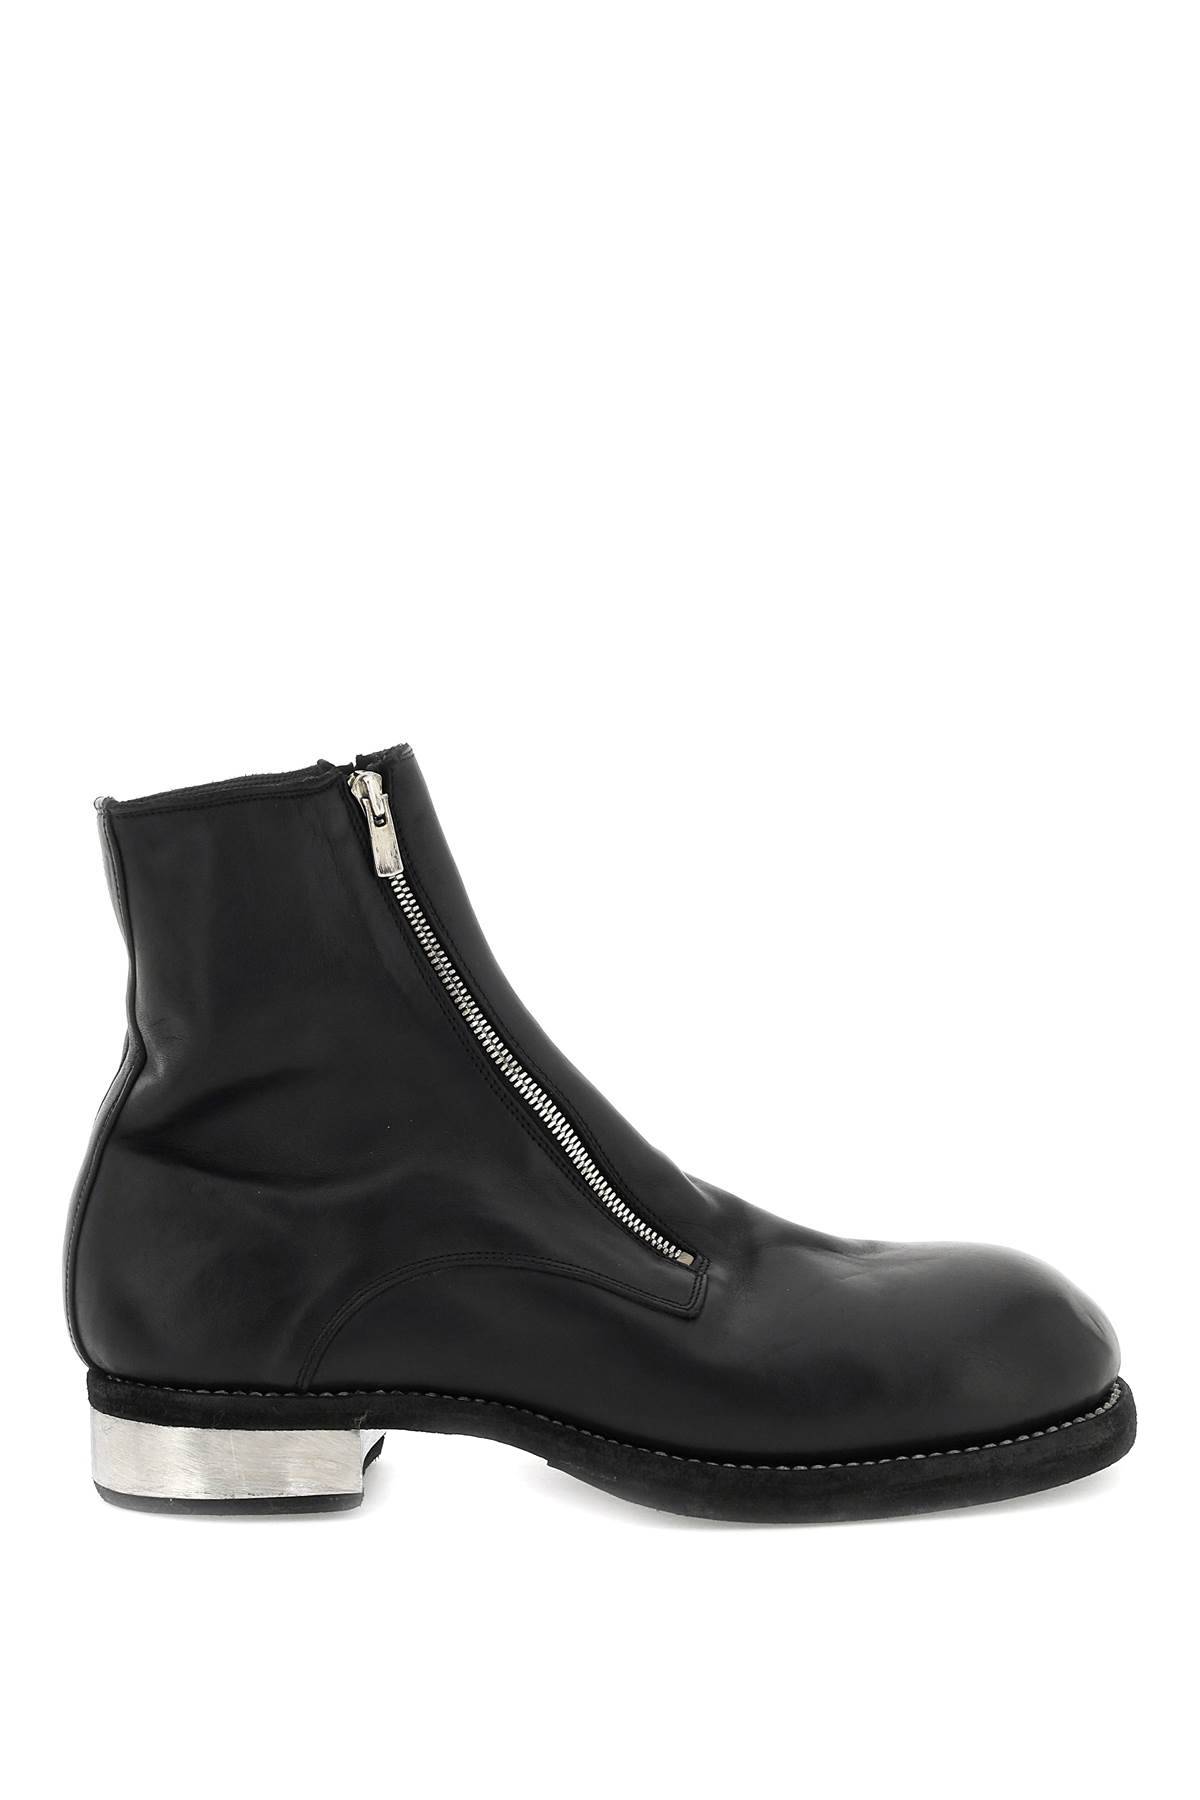 Guidi GUIDI leather double-zip ankle boots